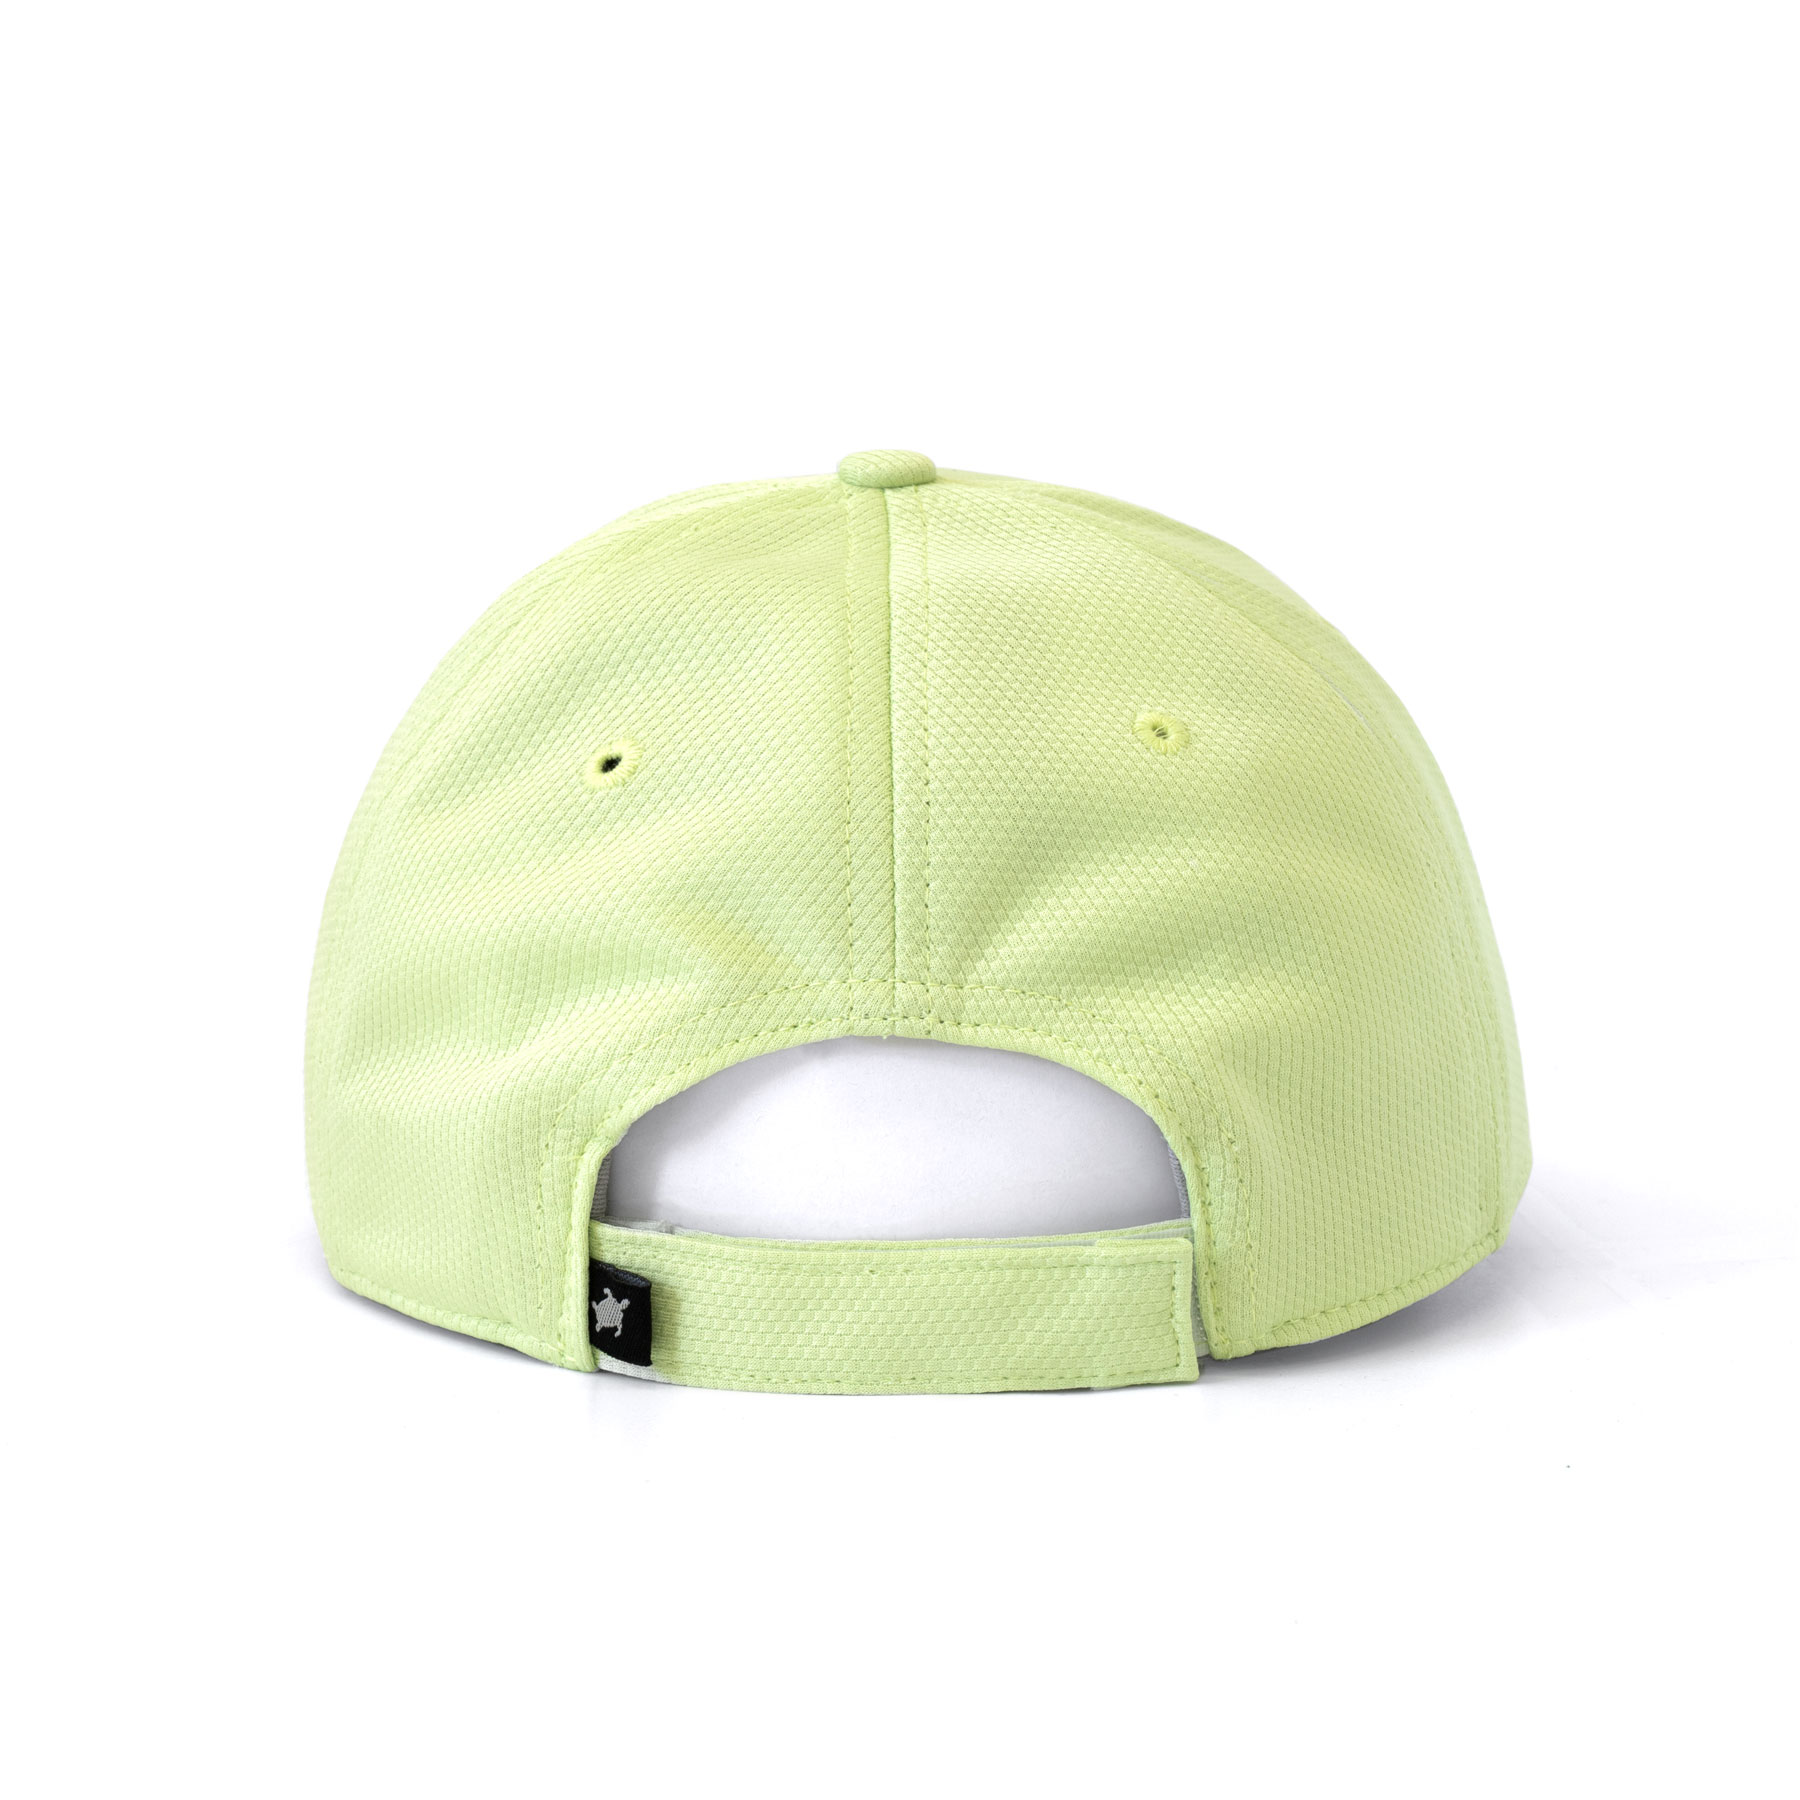 Smith & Miller Priego Curved Cap, light green